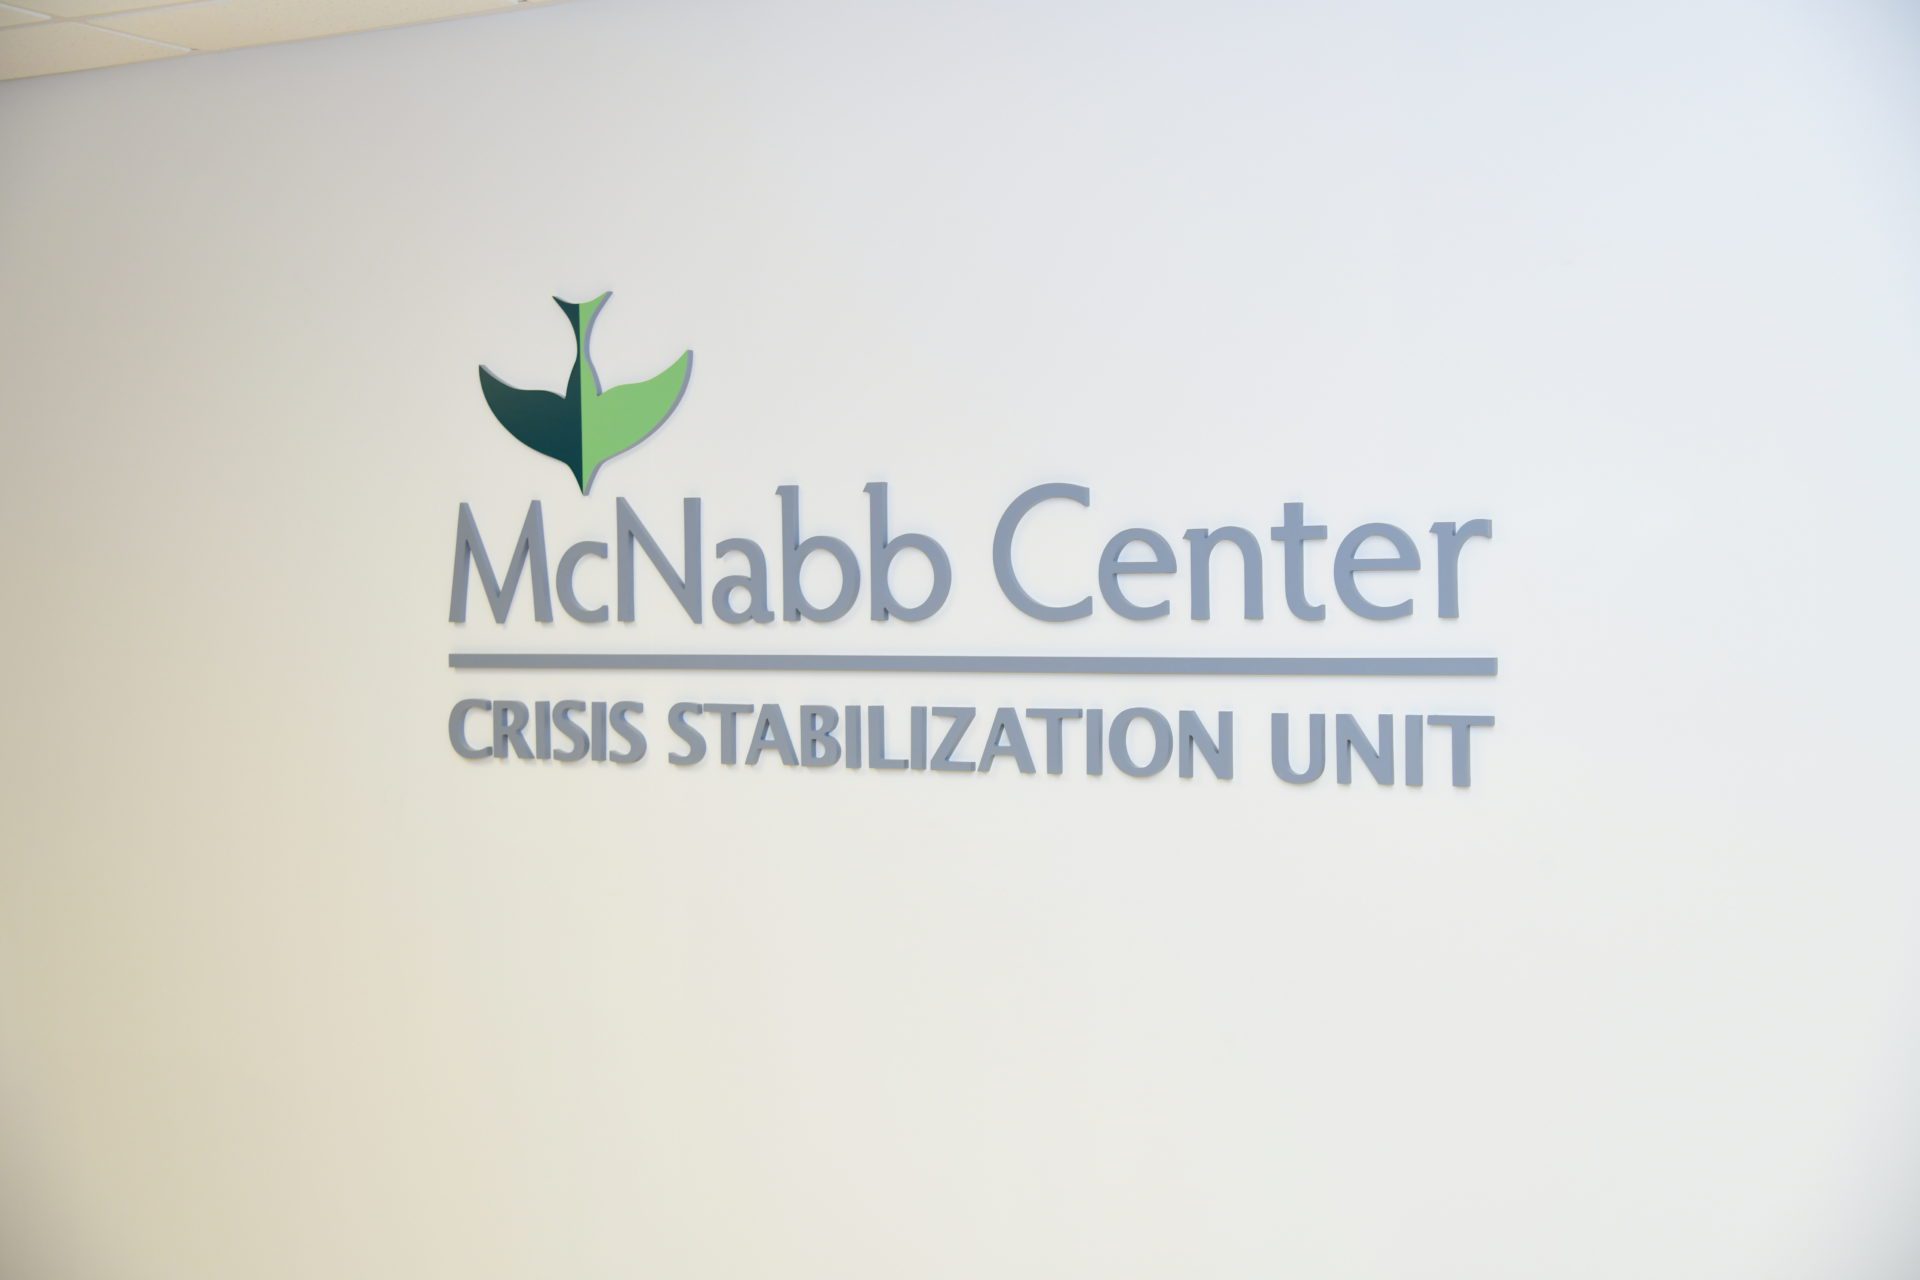 This image portrays Children's Crisis Stabilization Unit by McNabb Center.